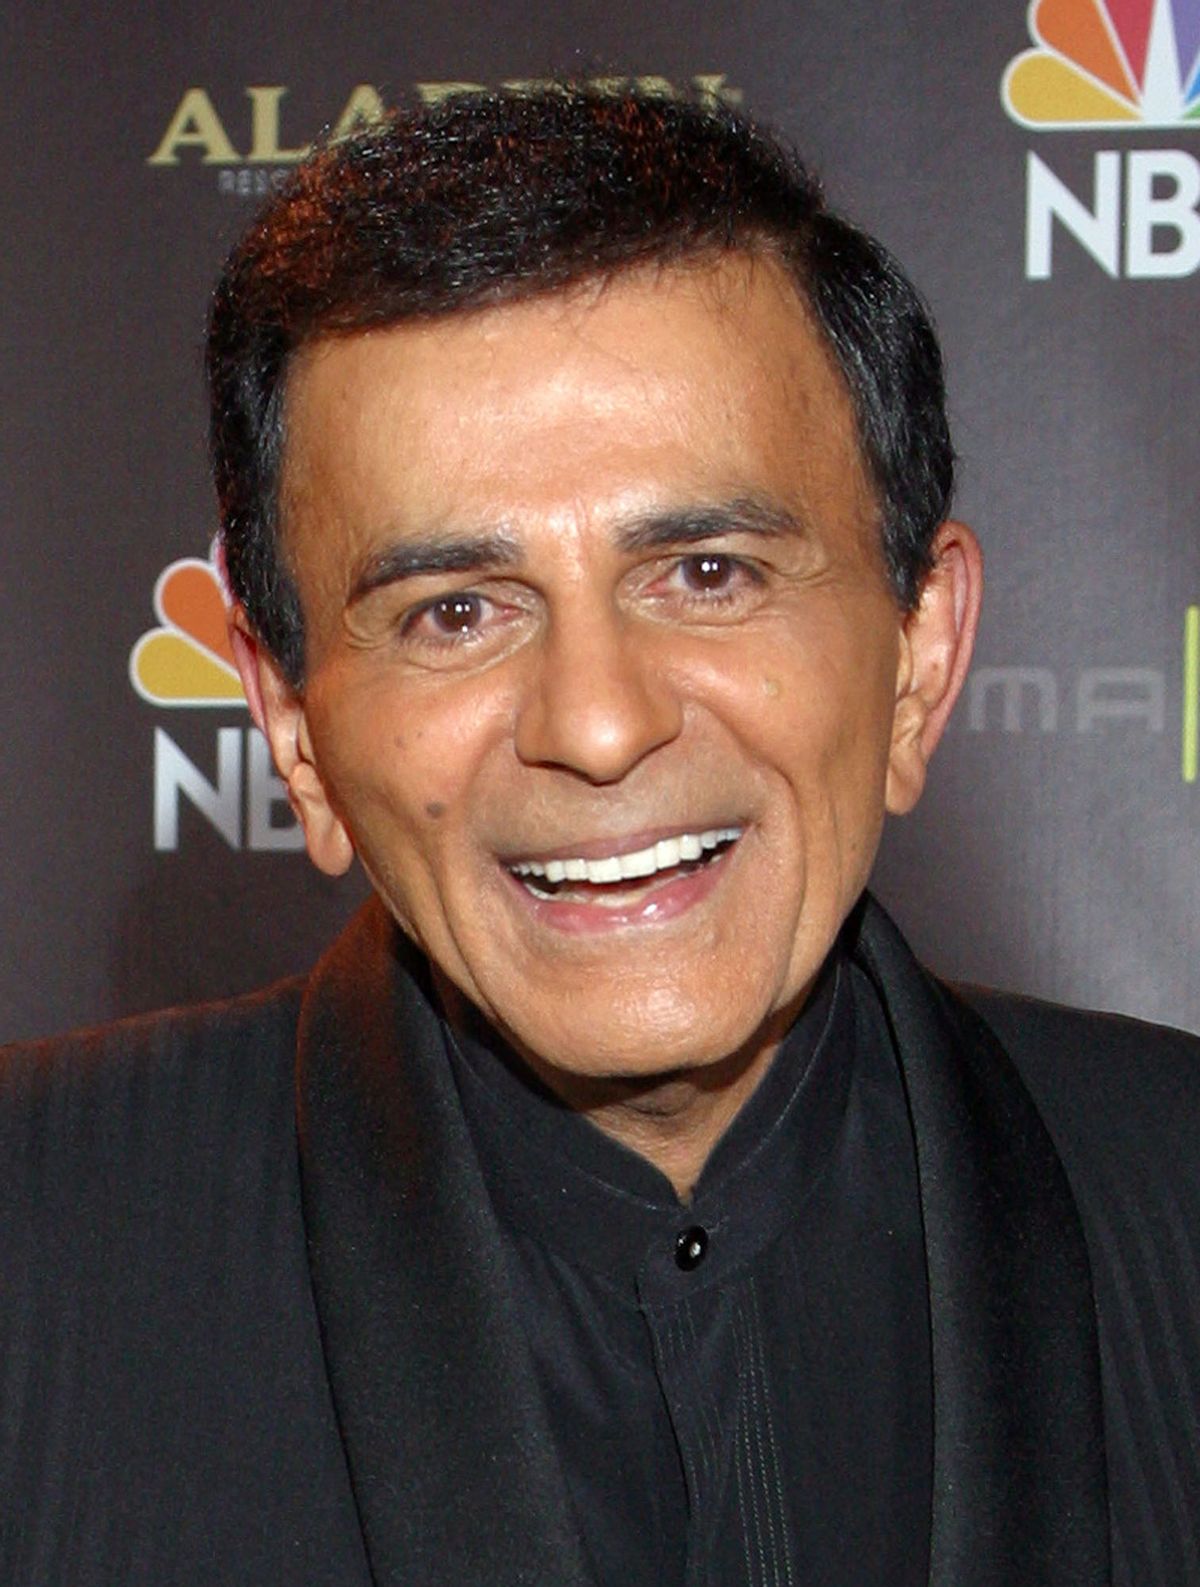 FILE - In this Oct. 27, 2003 file photo, Casey Kasem poses for photographers after receiving the Radio Icon award during The 2003 Radio Music Awards at the Aladdin Resort and Casino in Las Vegas. Kasem, the smooth-voiced radio broadcaster who became the king of the top 40 countdown, died Sunday, June 15, 2014, according to Danny Deraney, publicist for Kasem's daughter, Kerri. He was 82. (AP Photo/Eric Jamison, file)  (AP)